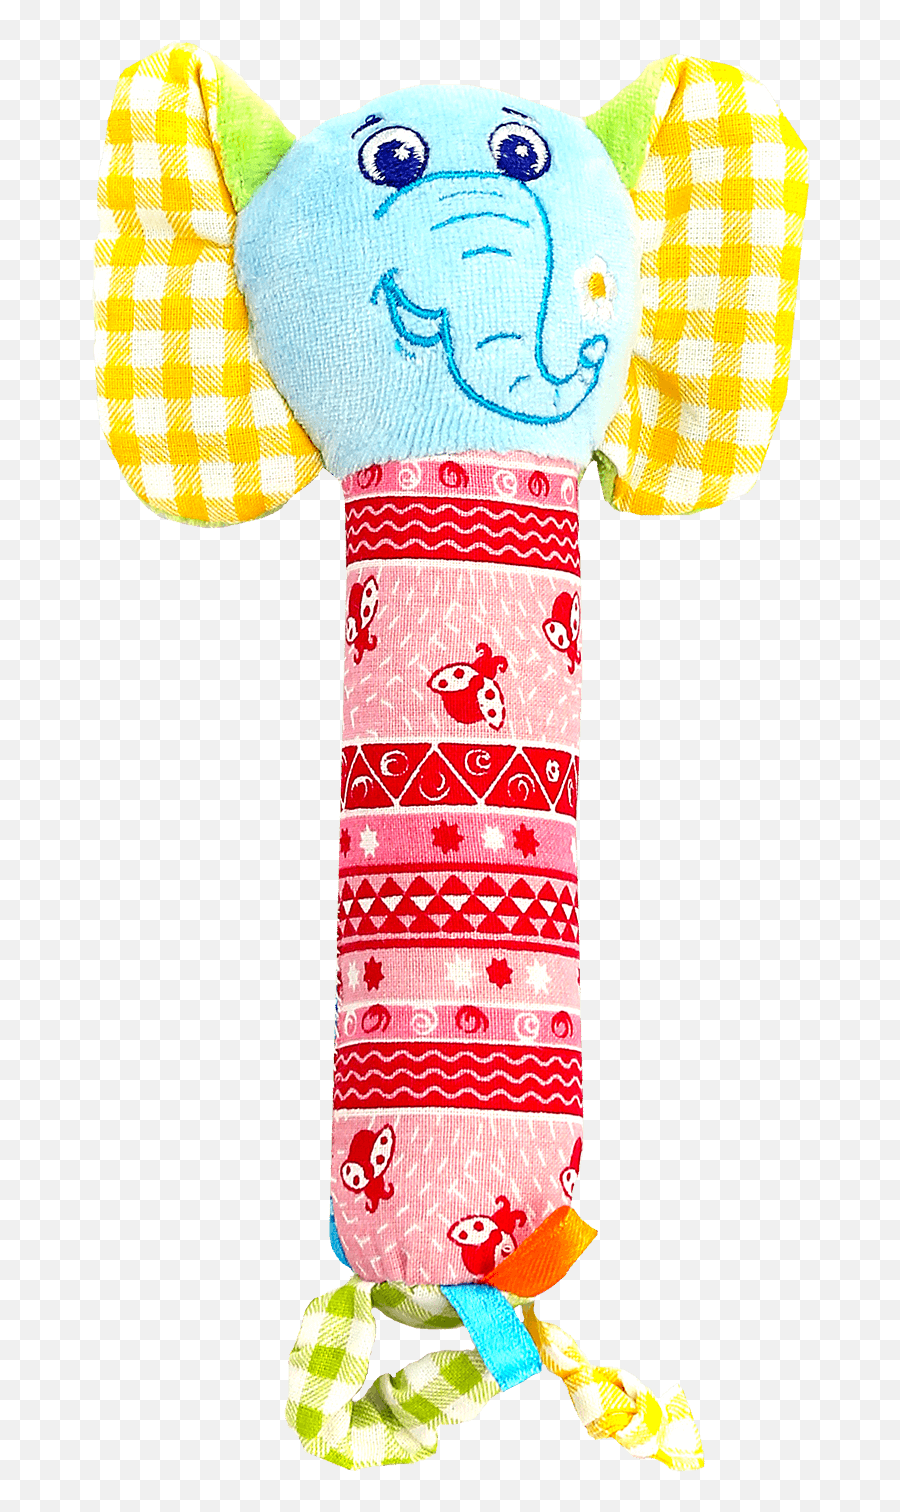 Download Baby Rattle Hd Png - Uokplrs Cartoon,Baby Rattle Png